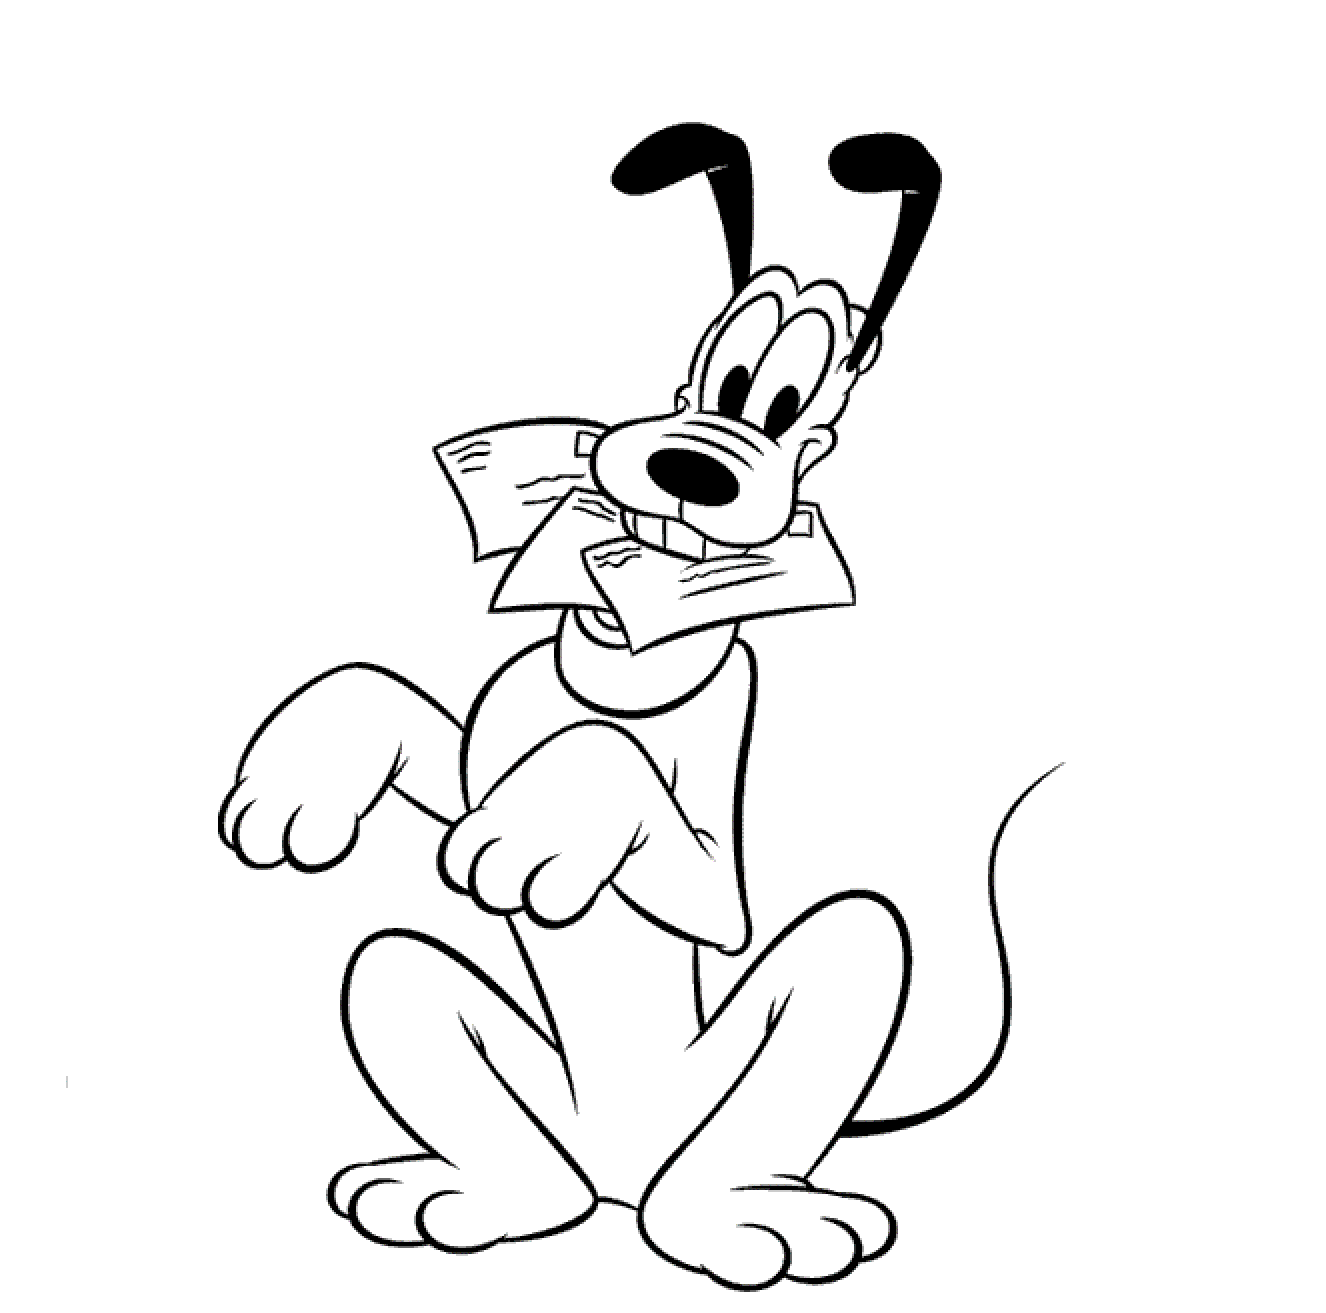 Disney Cartoon Pluto For Kid Coloring Page Free wallpaper